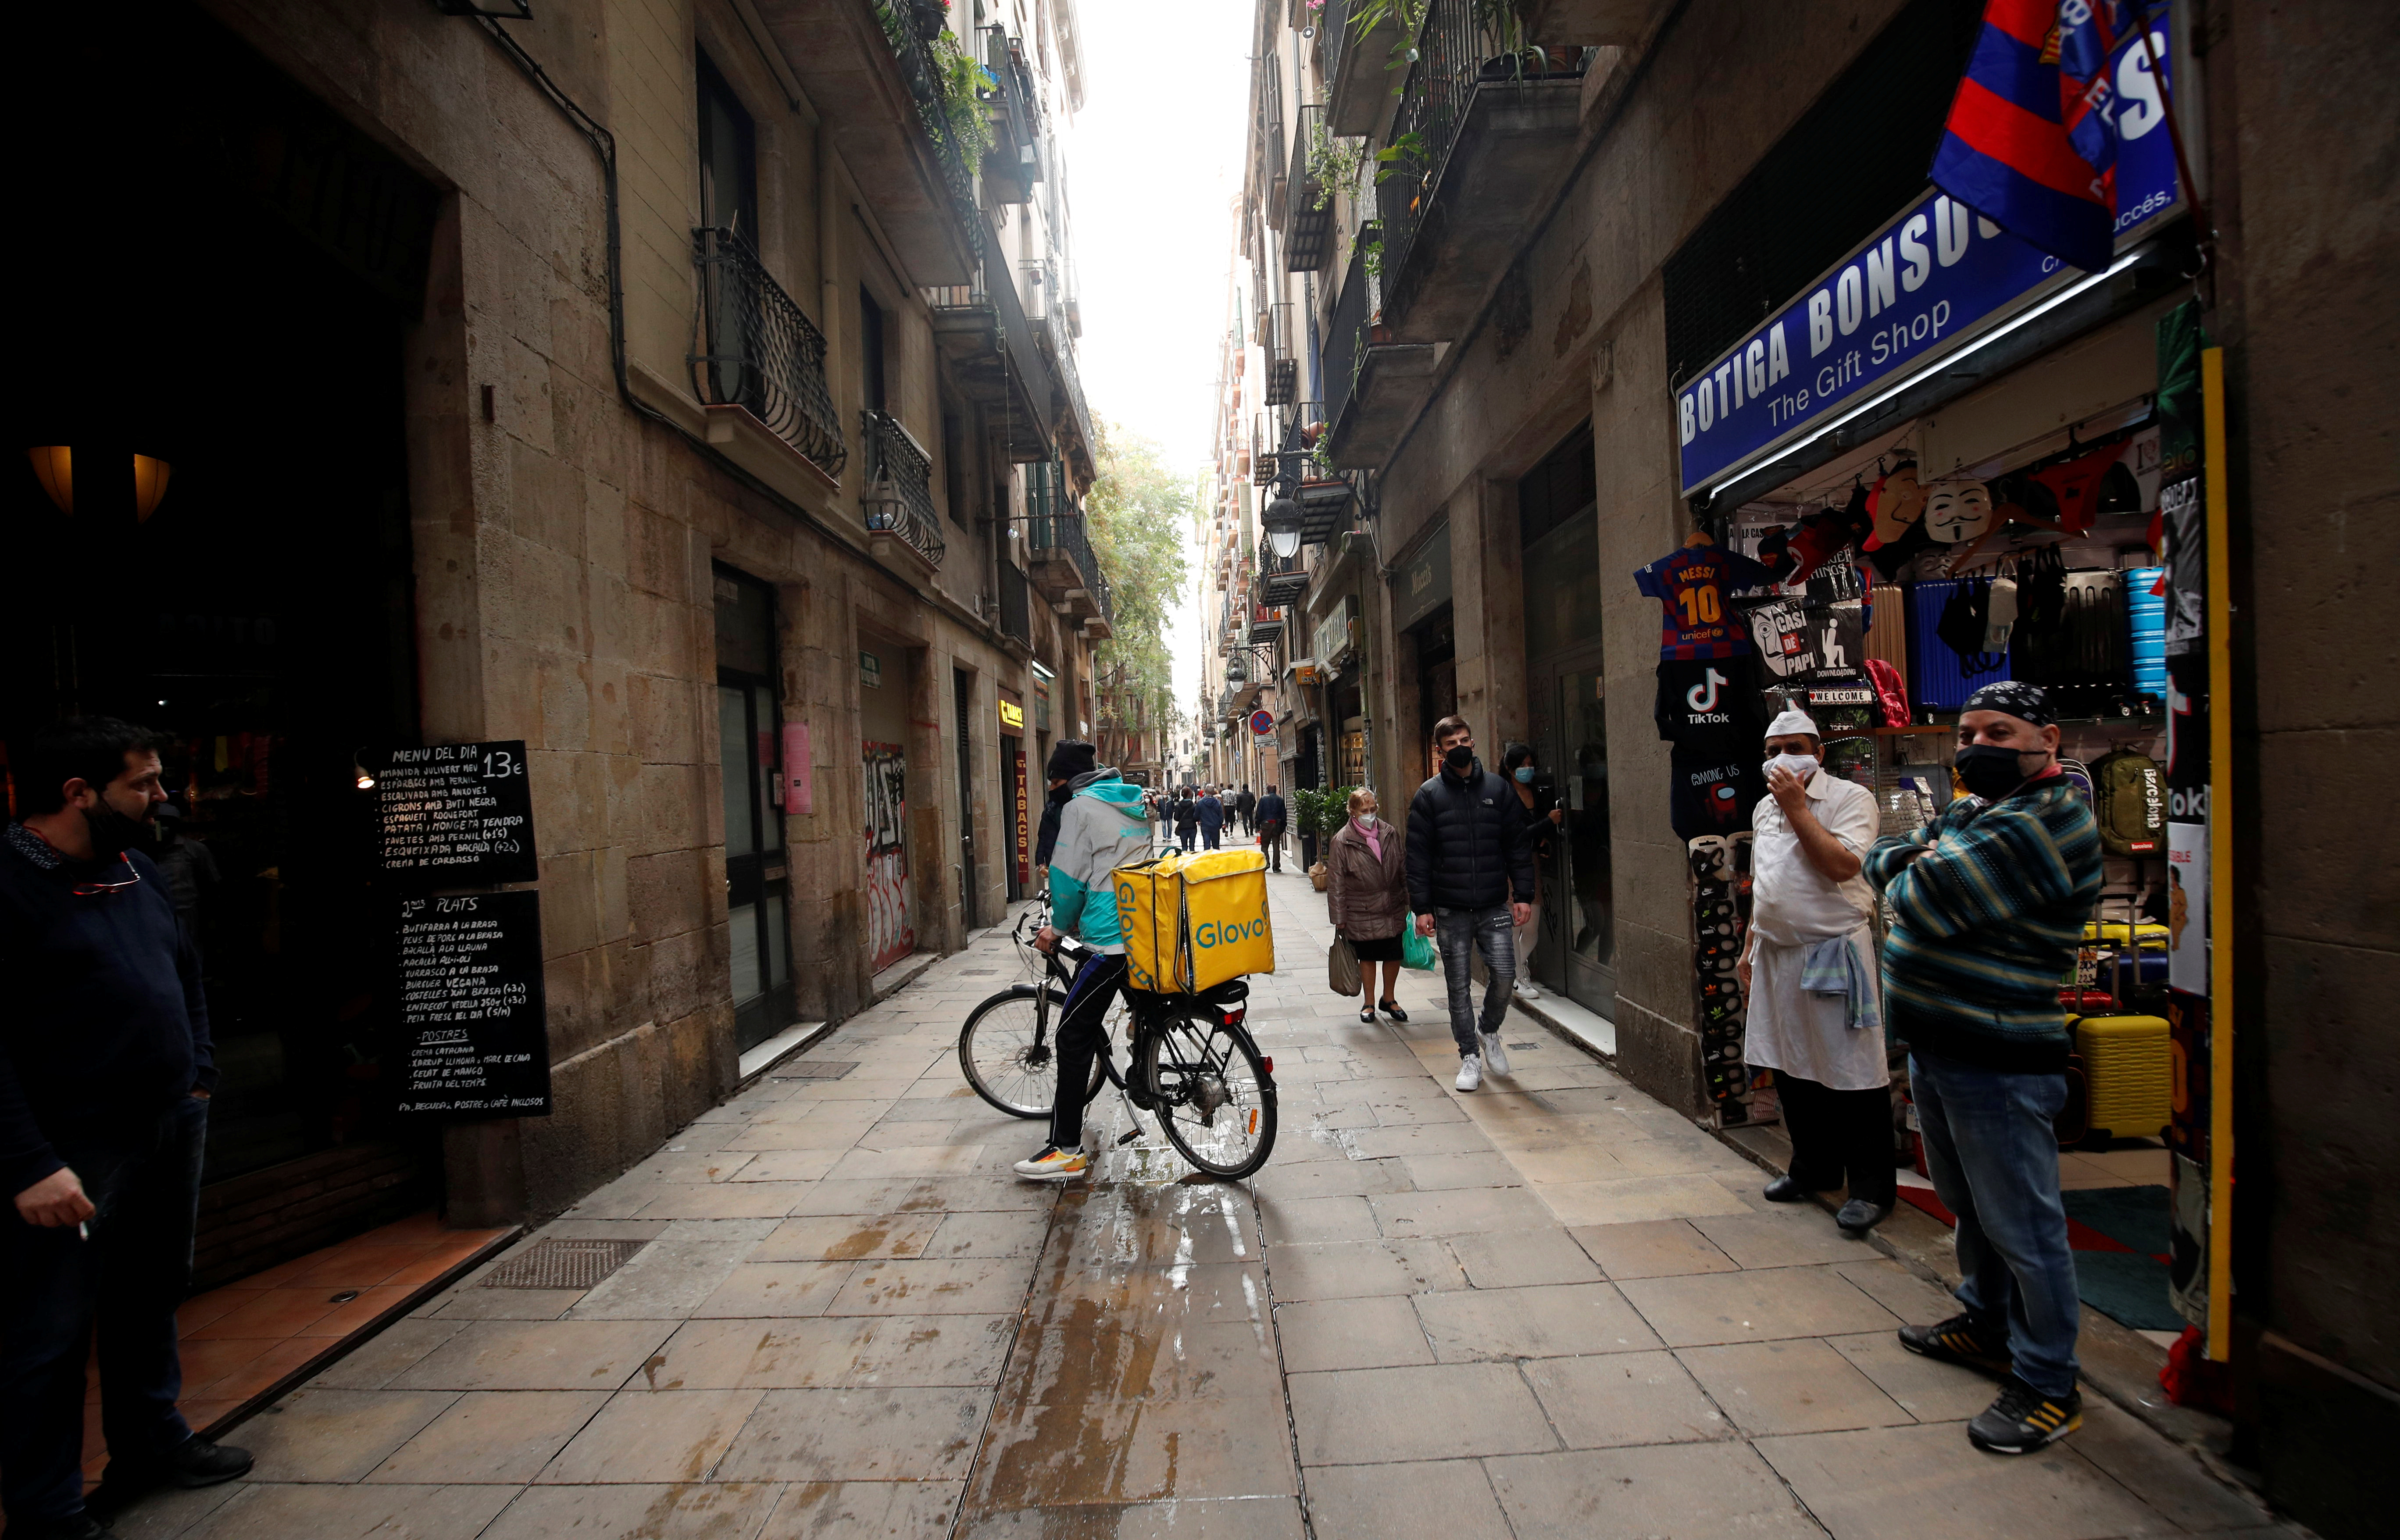 A delivery rider of Glovo stops in a street of Barcelona